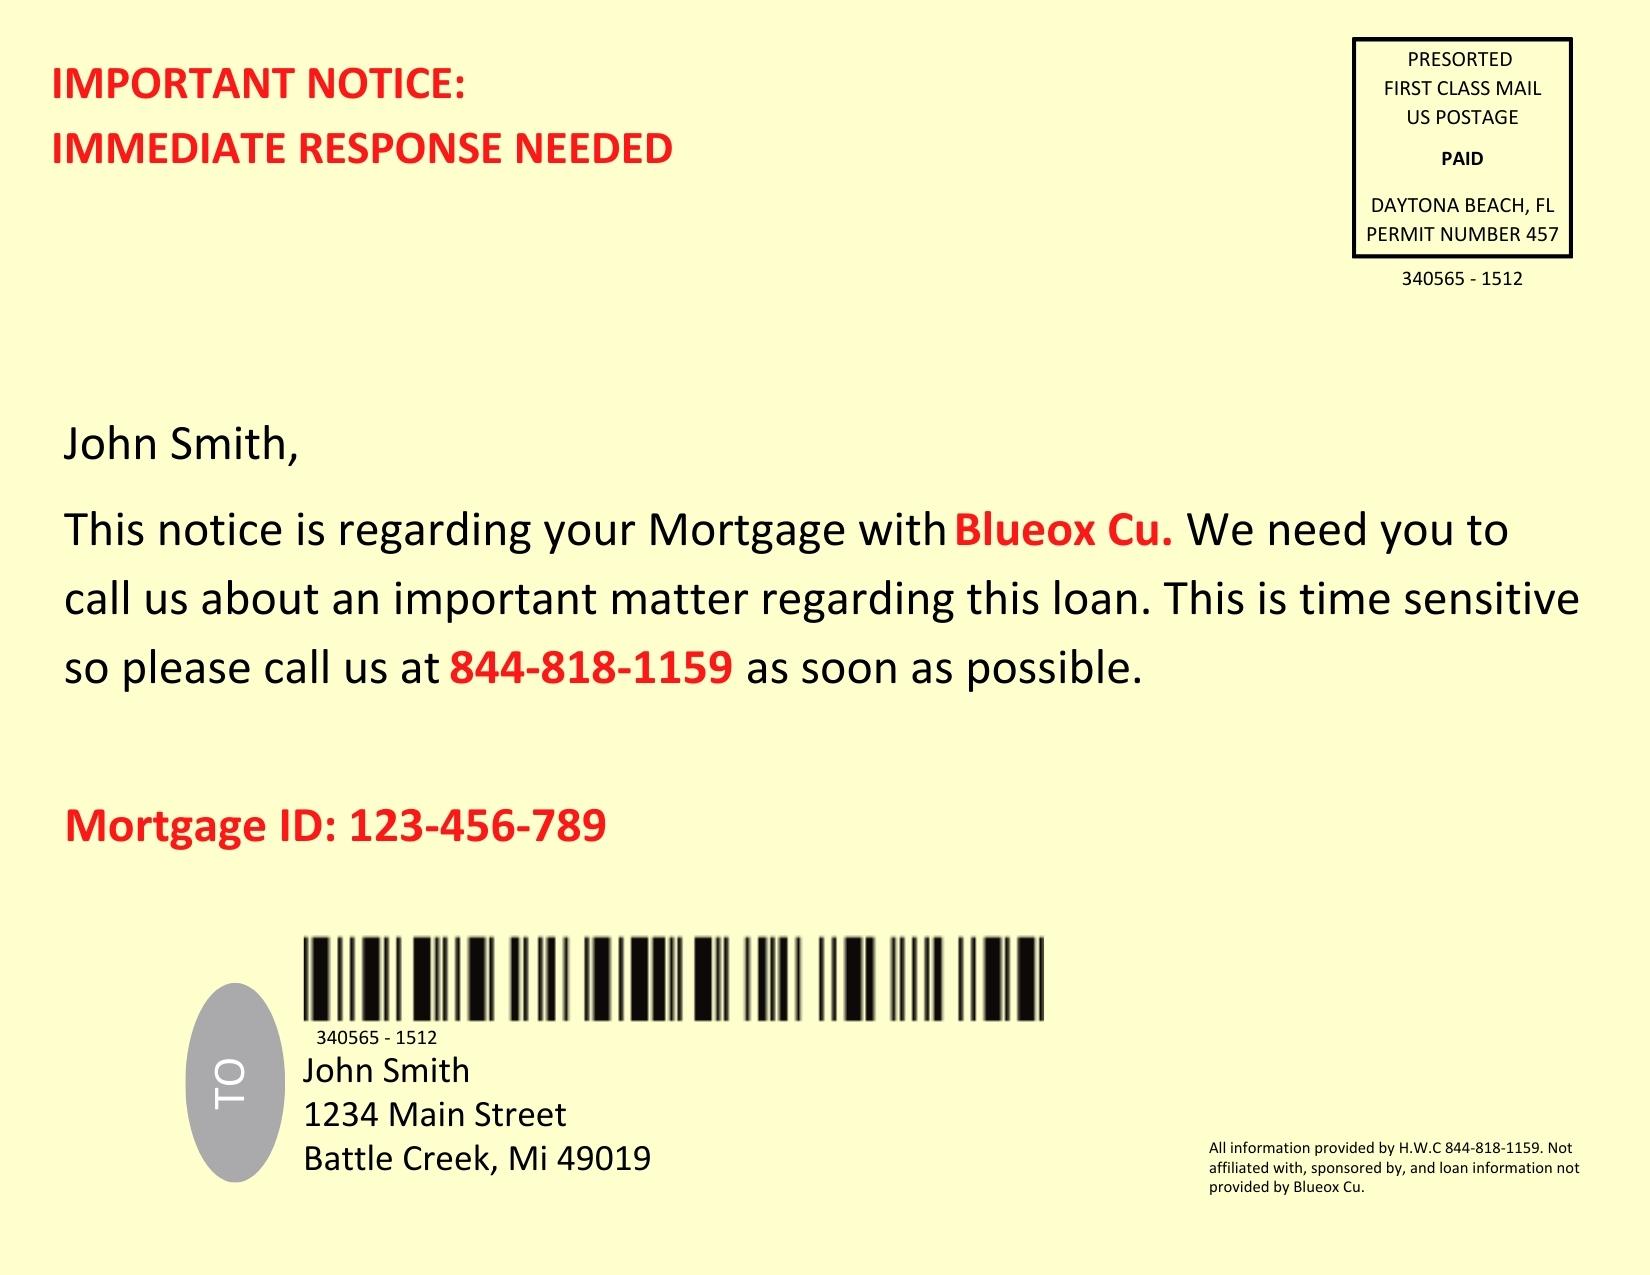 This is a mock-up postcard of a mortgage scam that is NOT from BlueOx Credit Union. If received in the mail, please disregard.